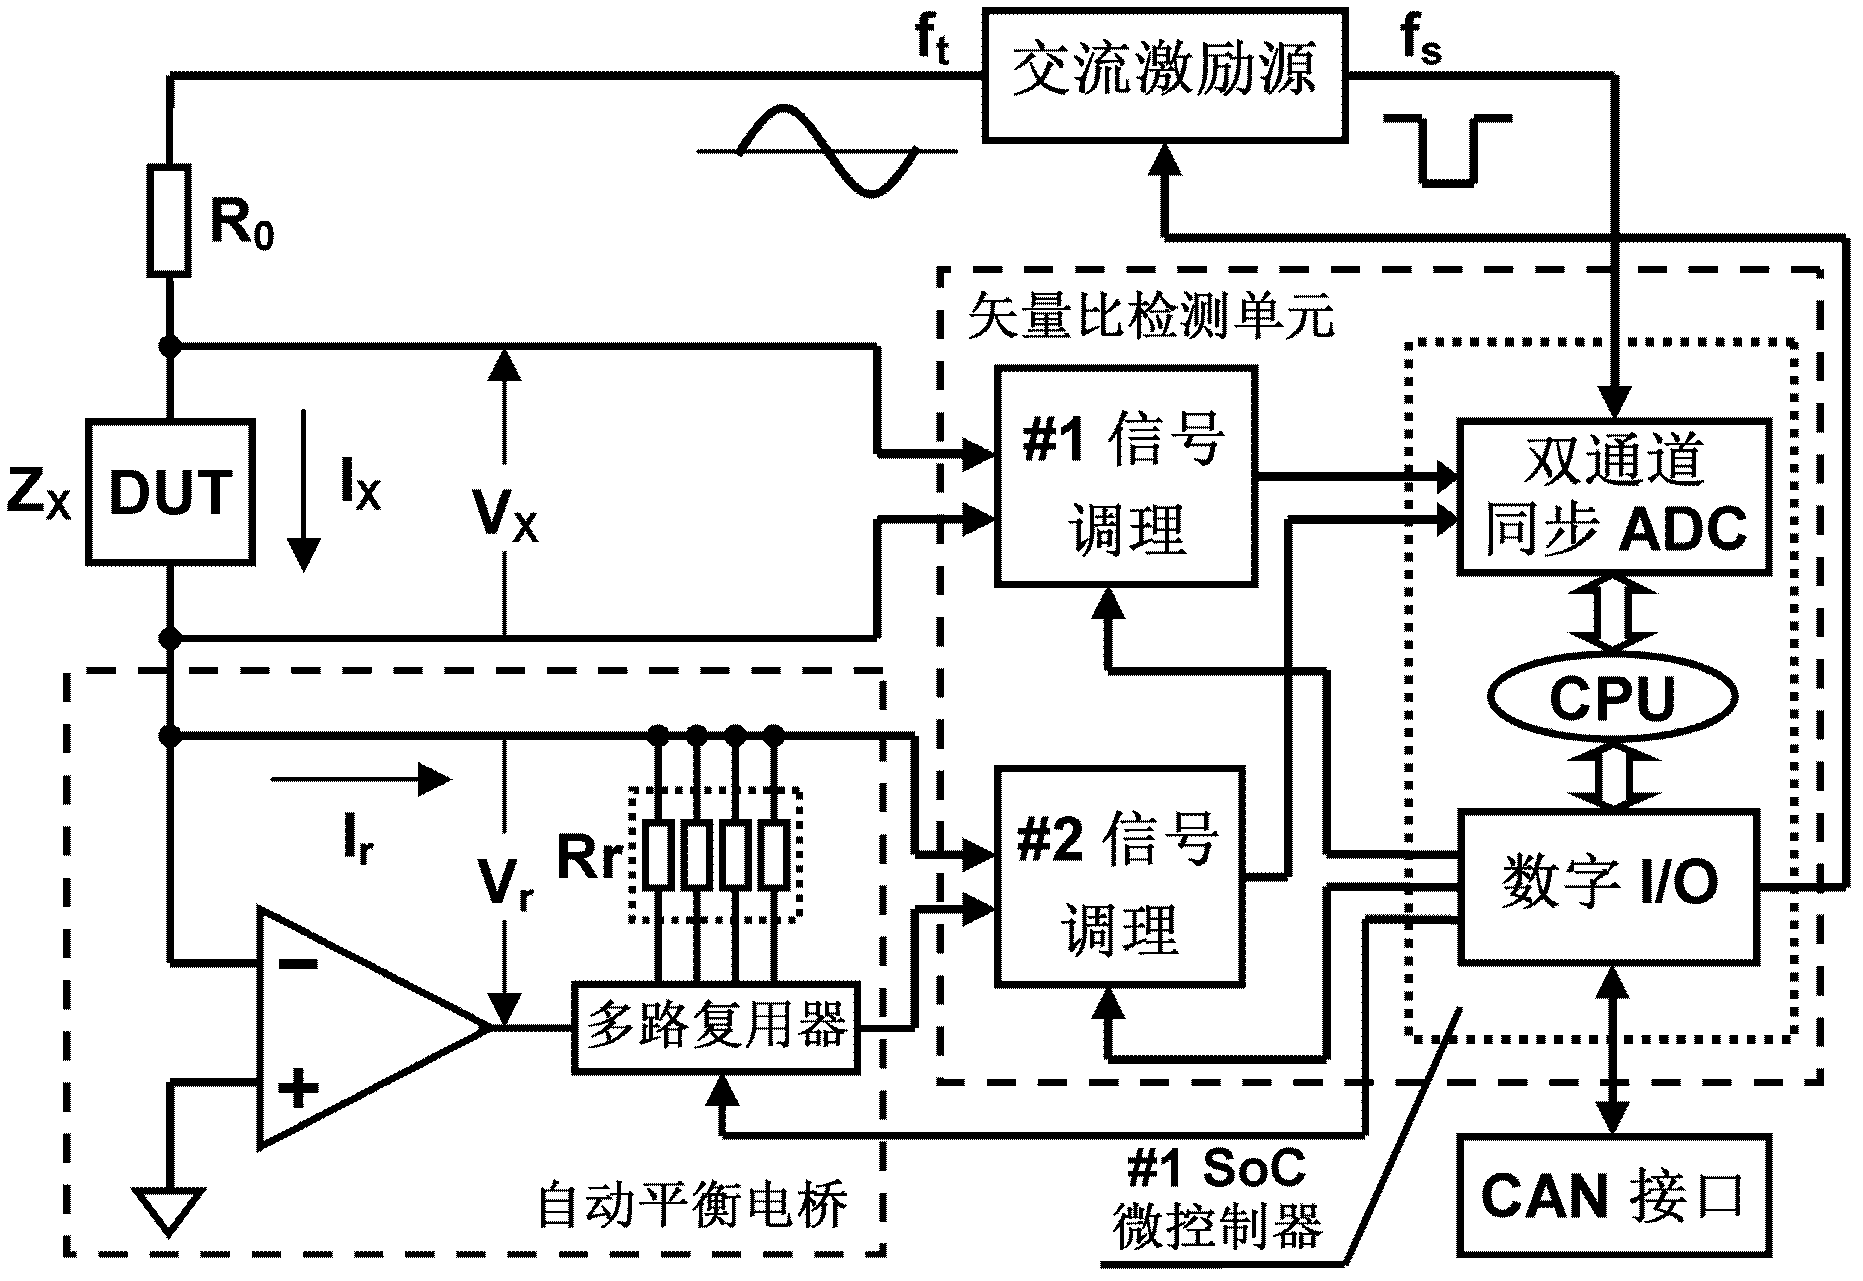 Alternating current (AC) impedance spectroscopy automatic testing device of positive temperature coefficient (PTC) thermistor